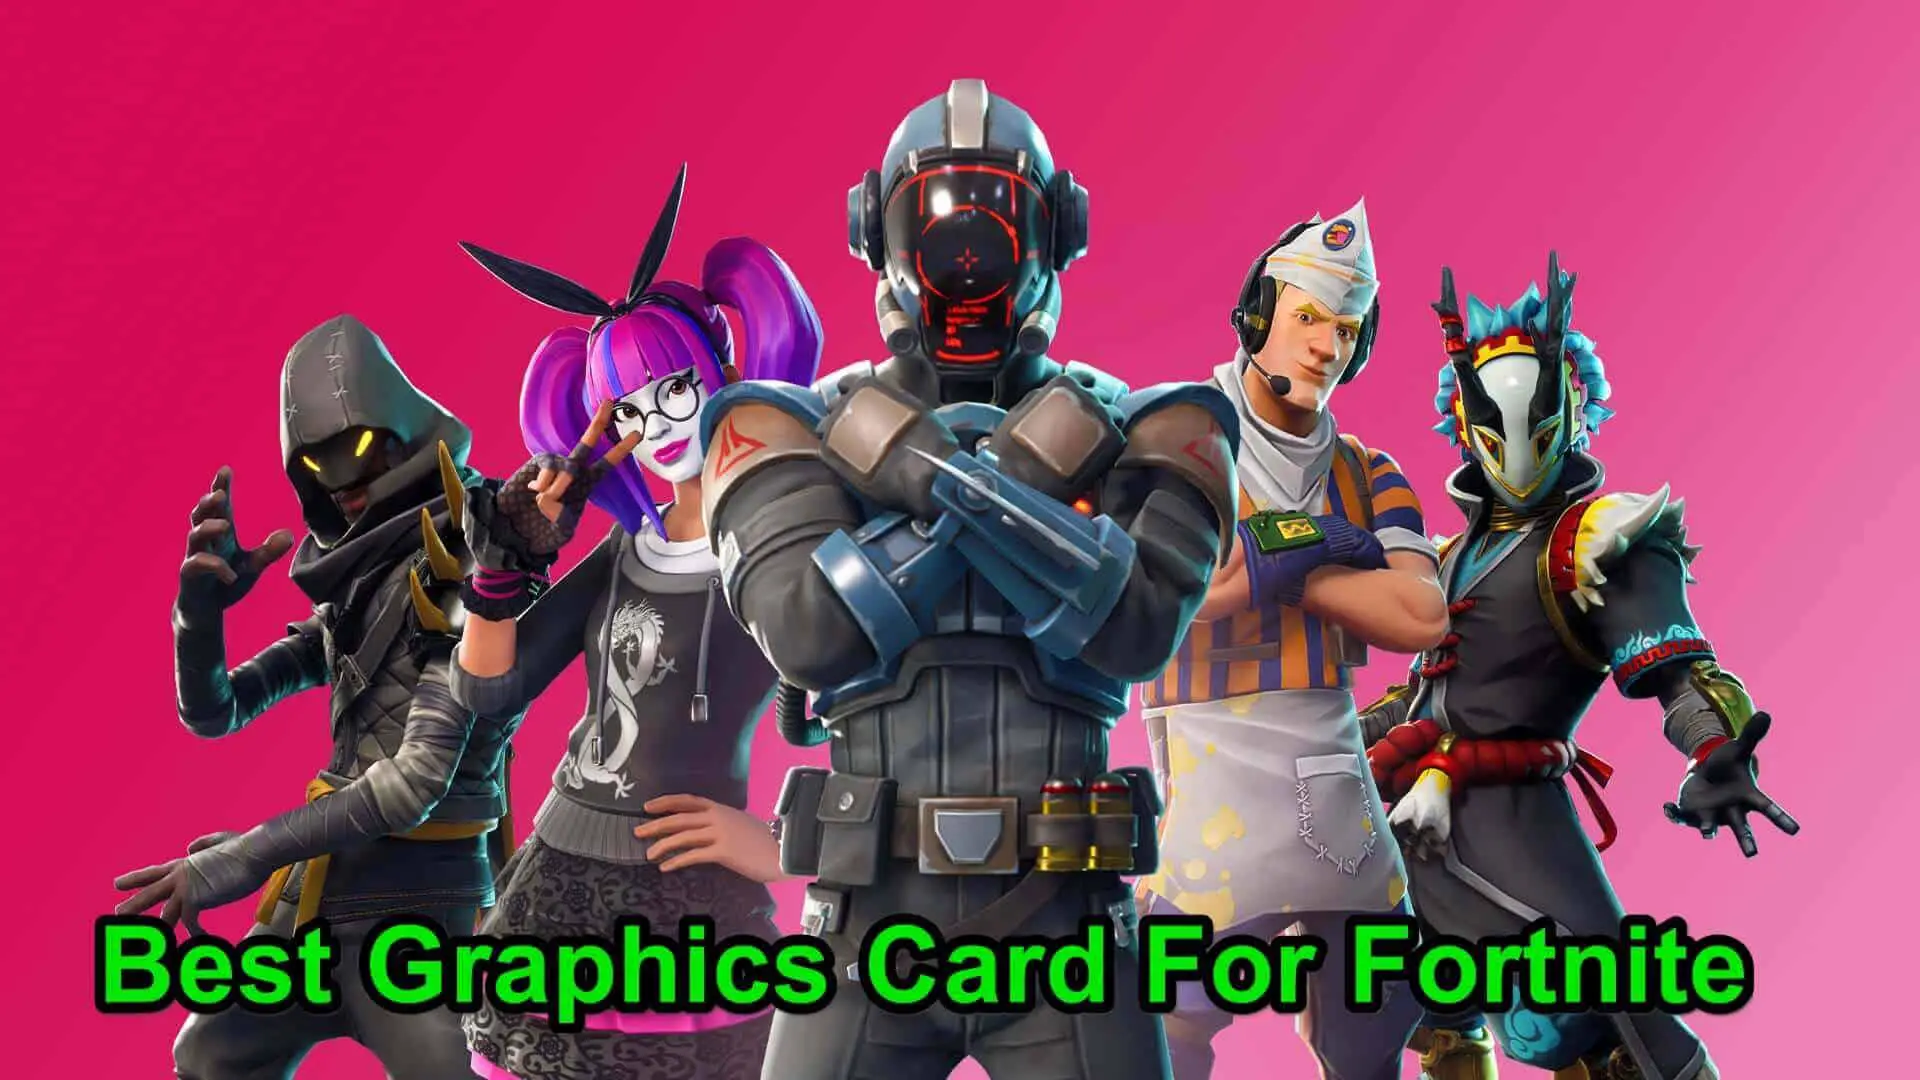 Graphics Card For Fortnite